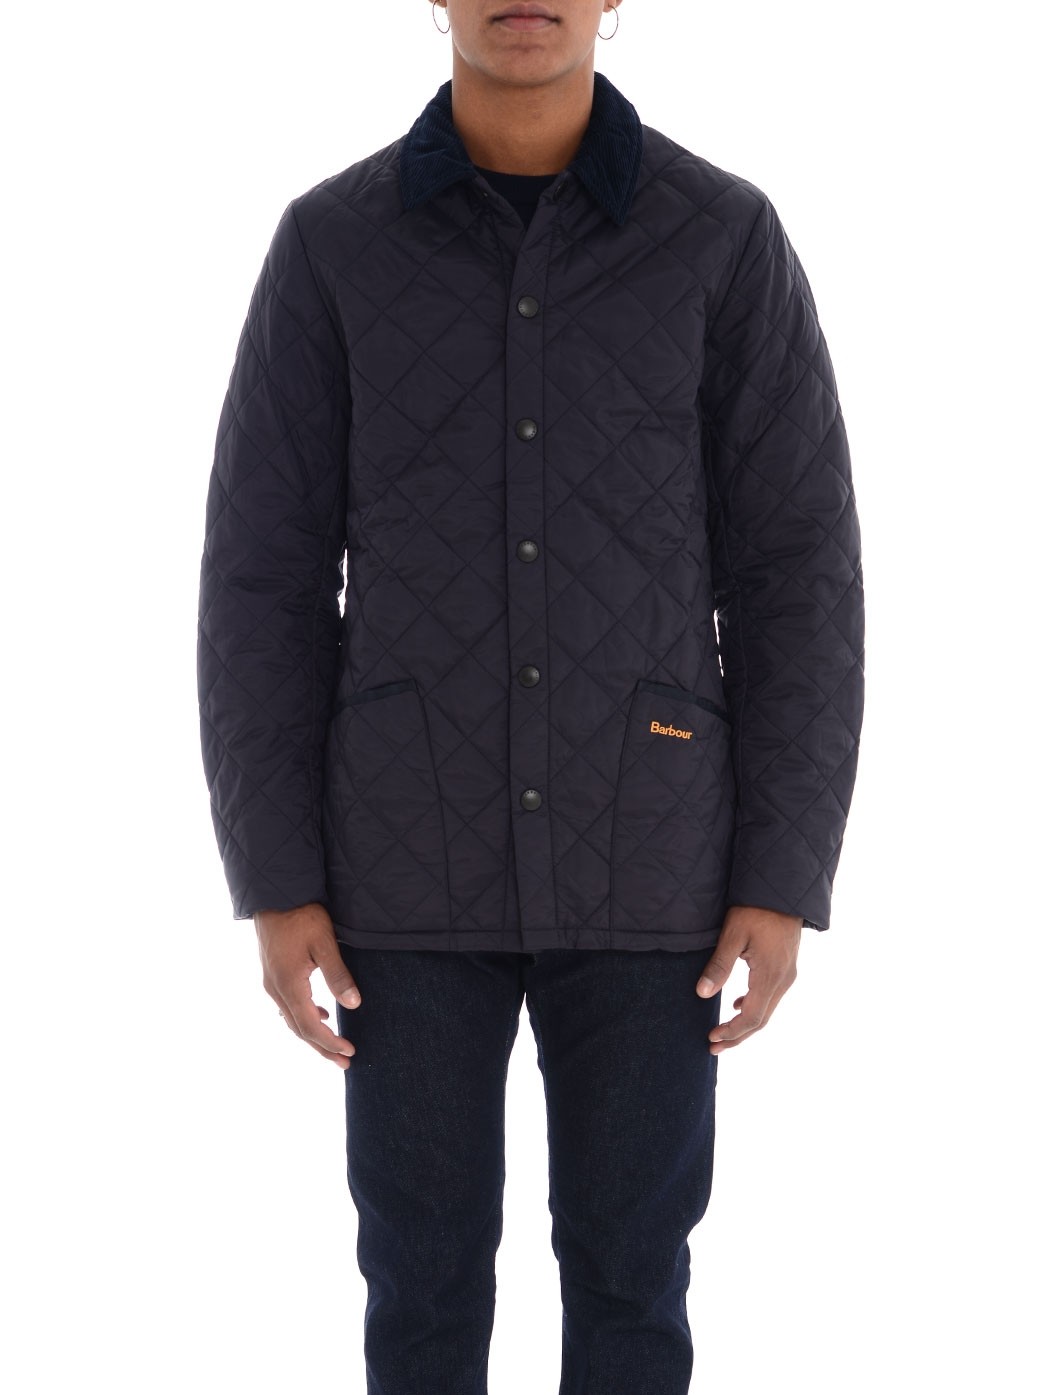  MAN DOWN JACKET,MONCLER DOWN JACKET,HERNO DOWN JACKET,WOOLRICH DOWN JACKET  BARBOUR MQU0240